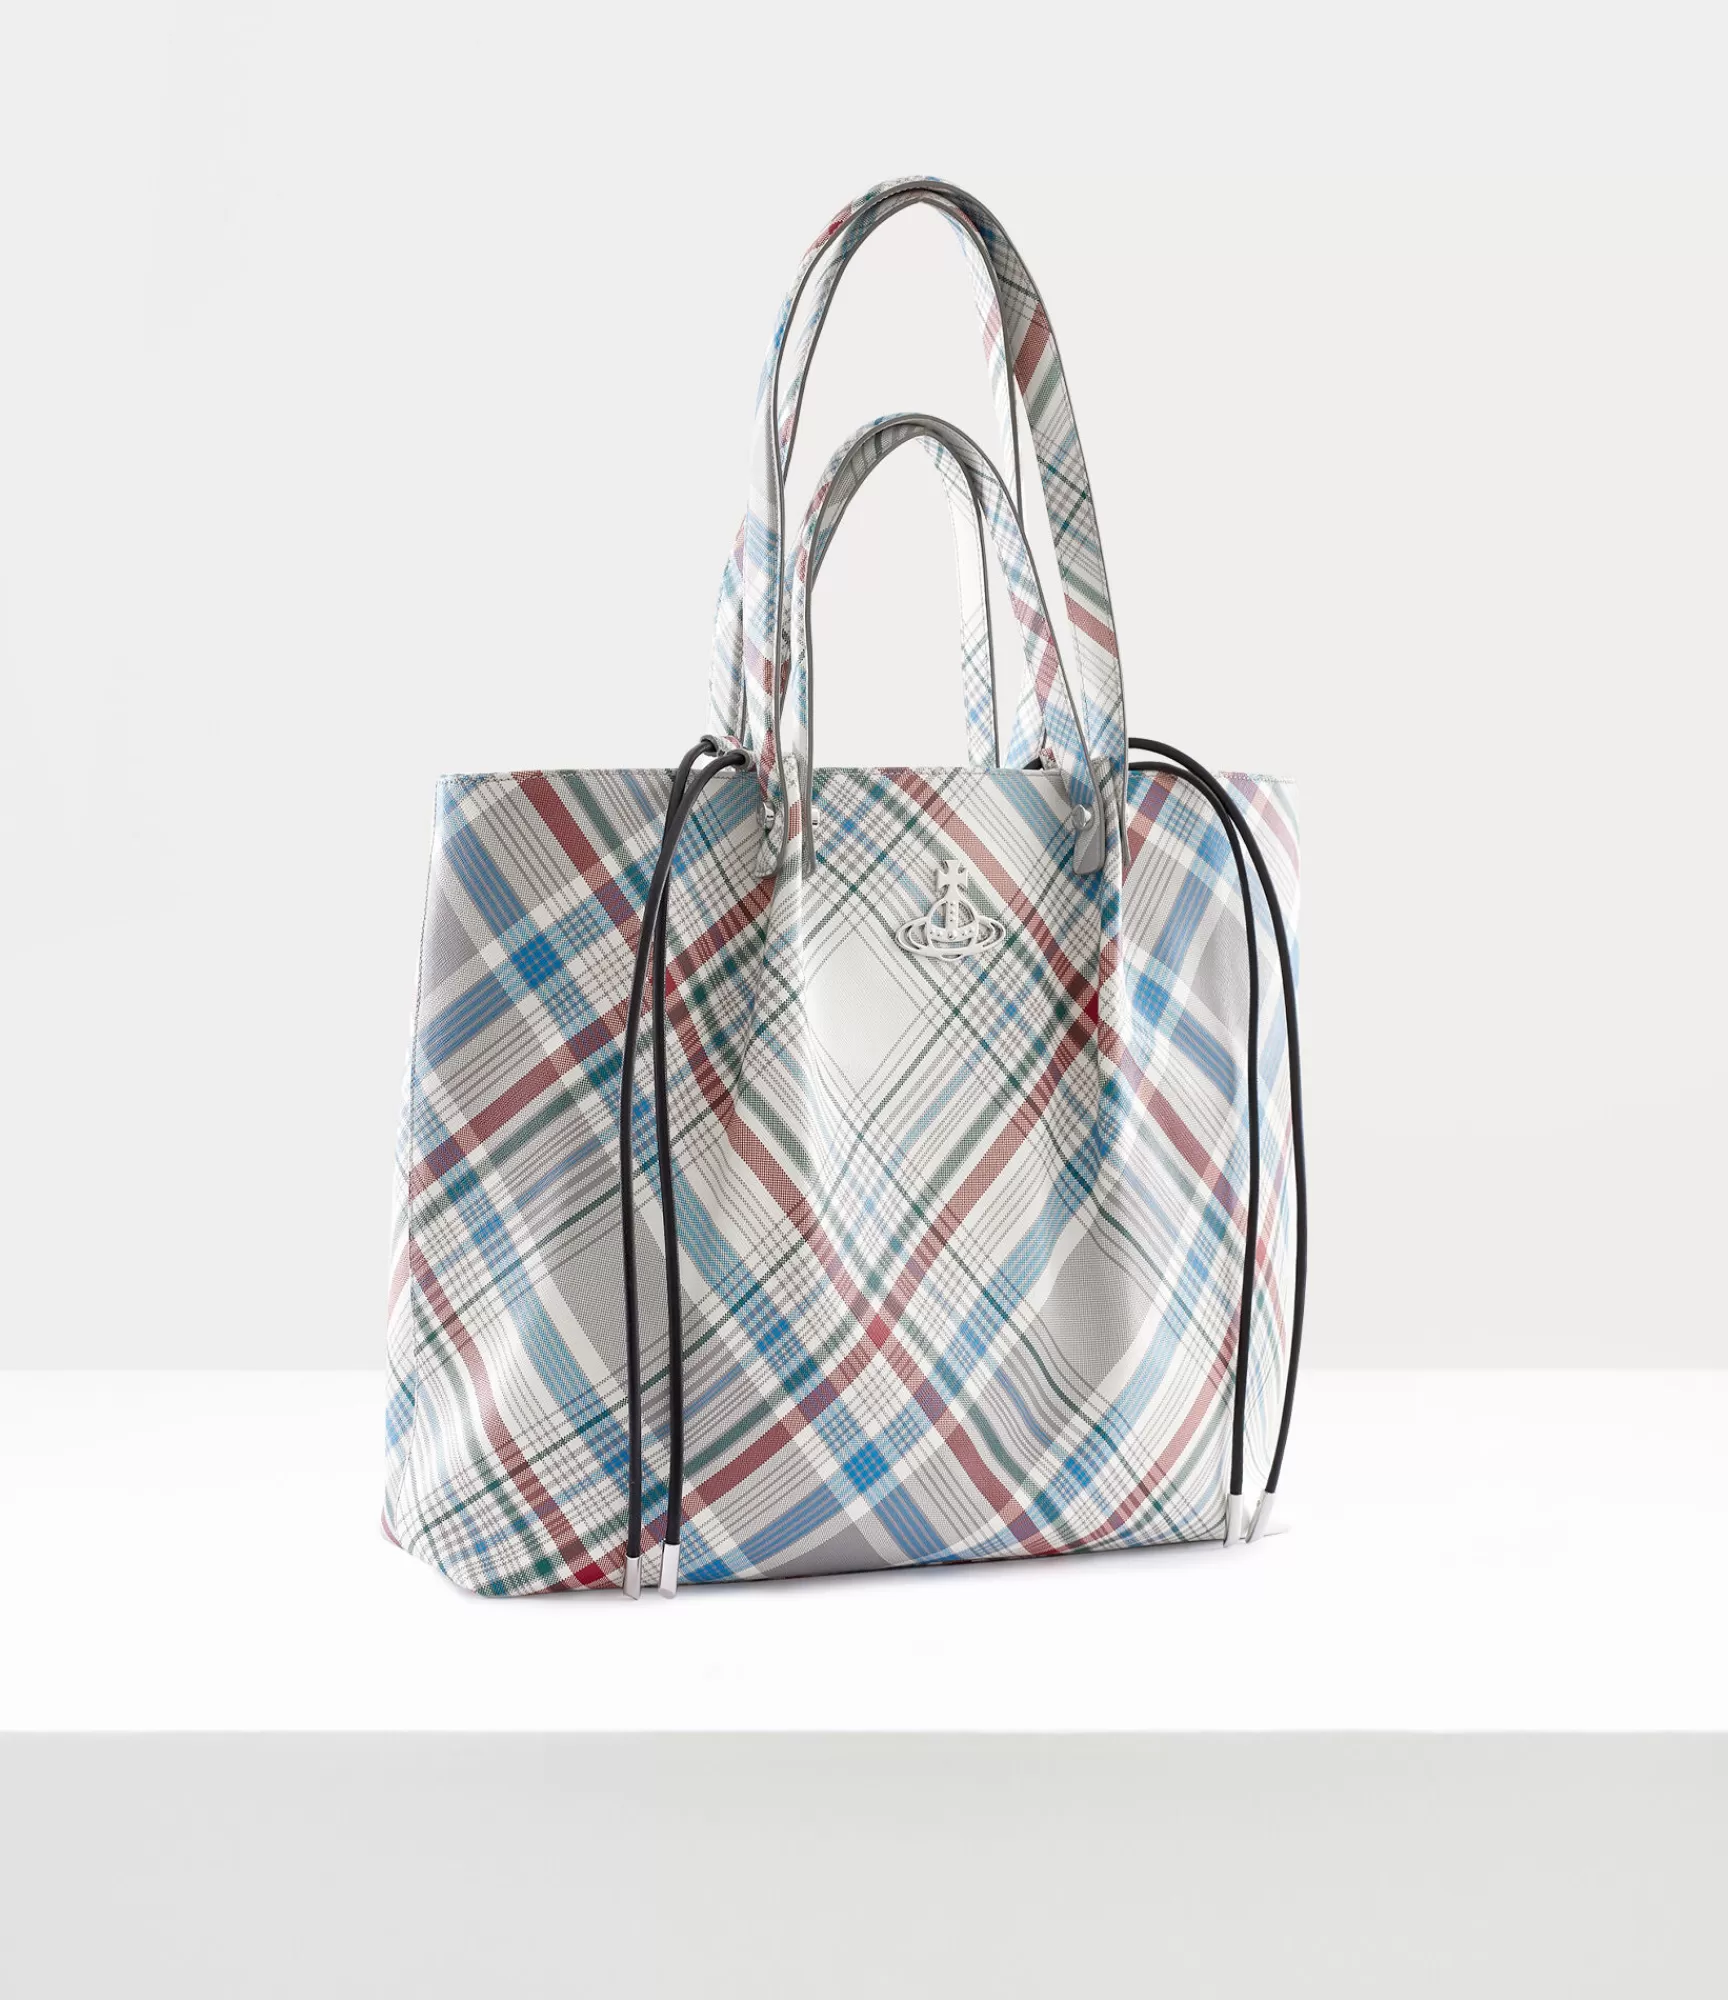 Vivienne Westwood Tote Bags | Totebags*Tina tote Madras Check